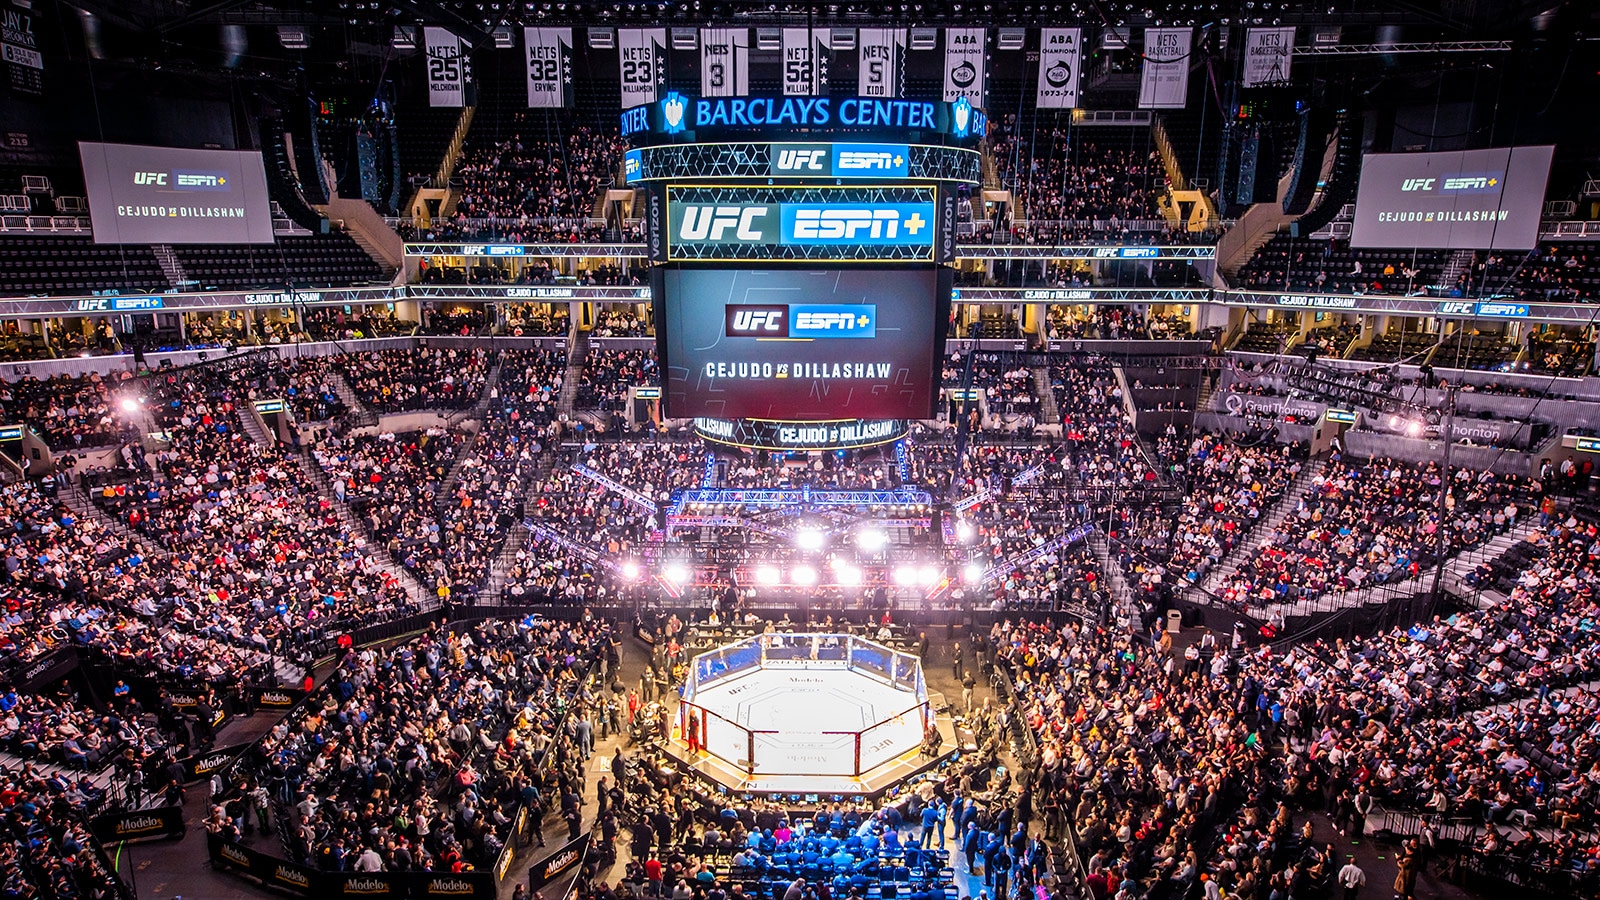 Meyer Sound LEOPARD Scores a TKO with “Dream System” for Intense UFC Events